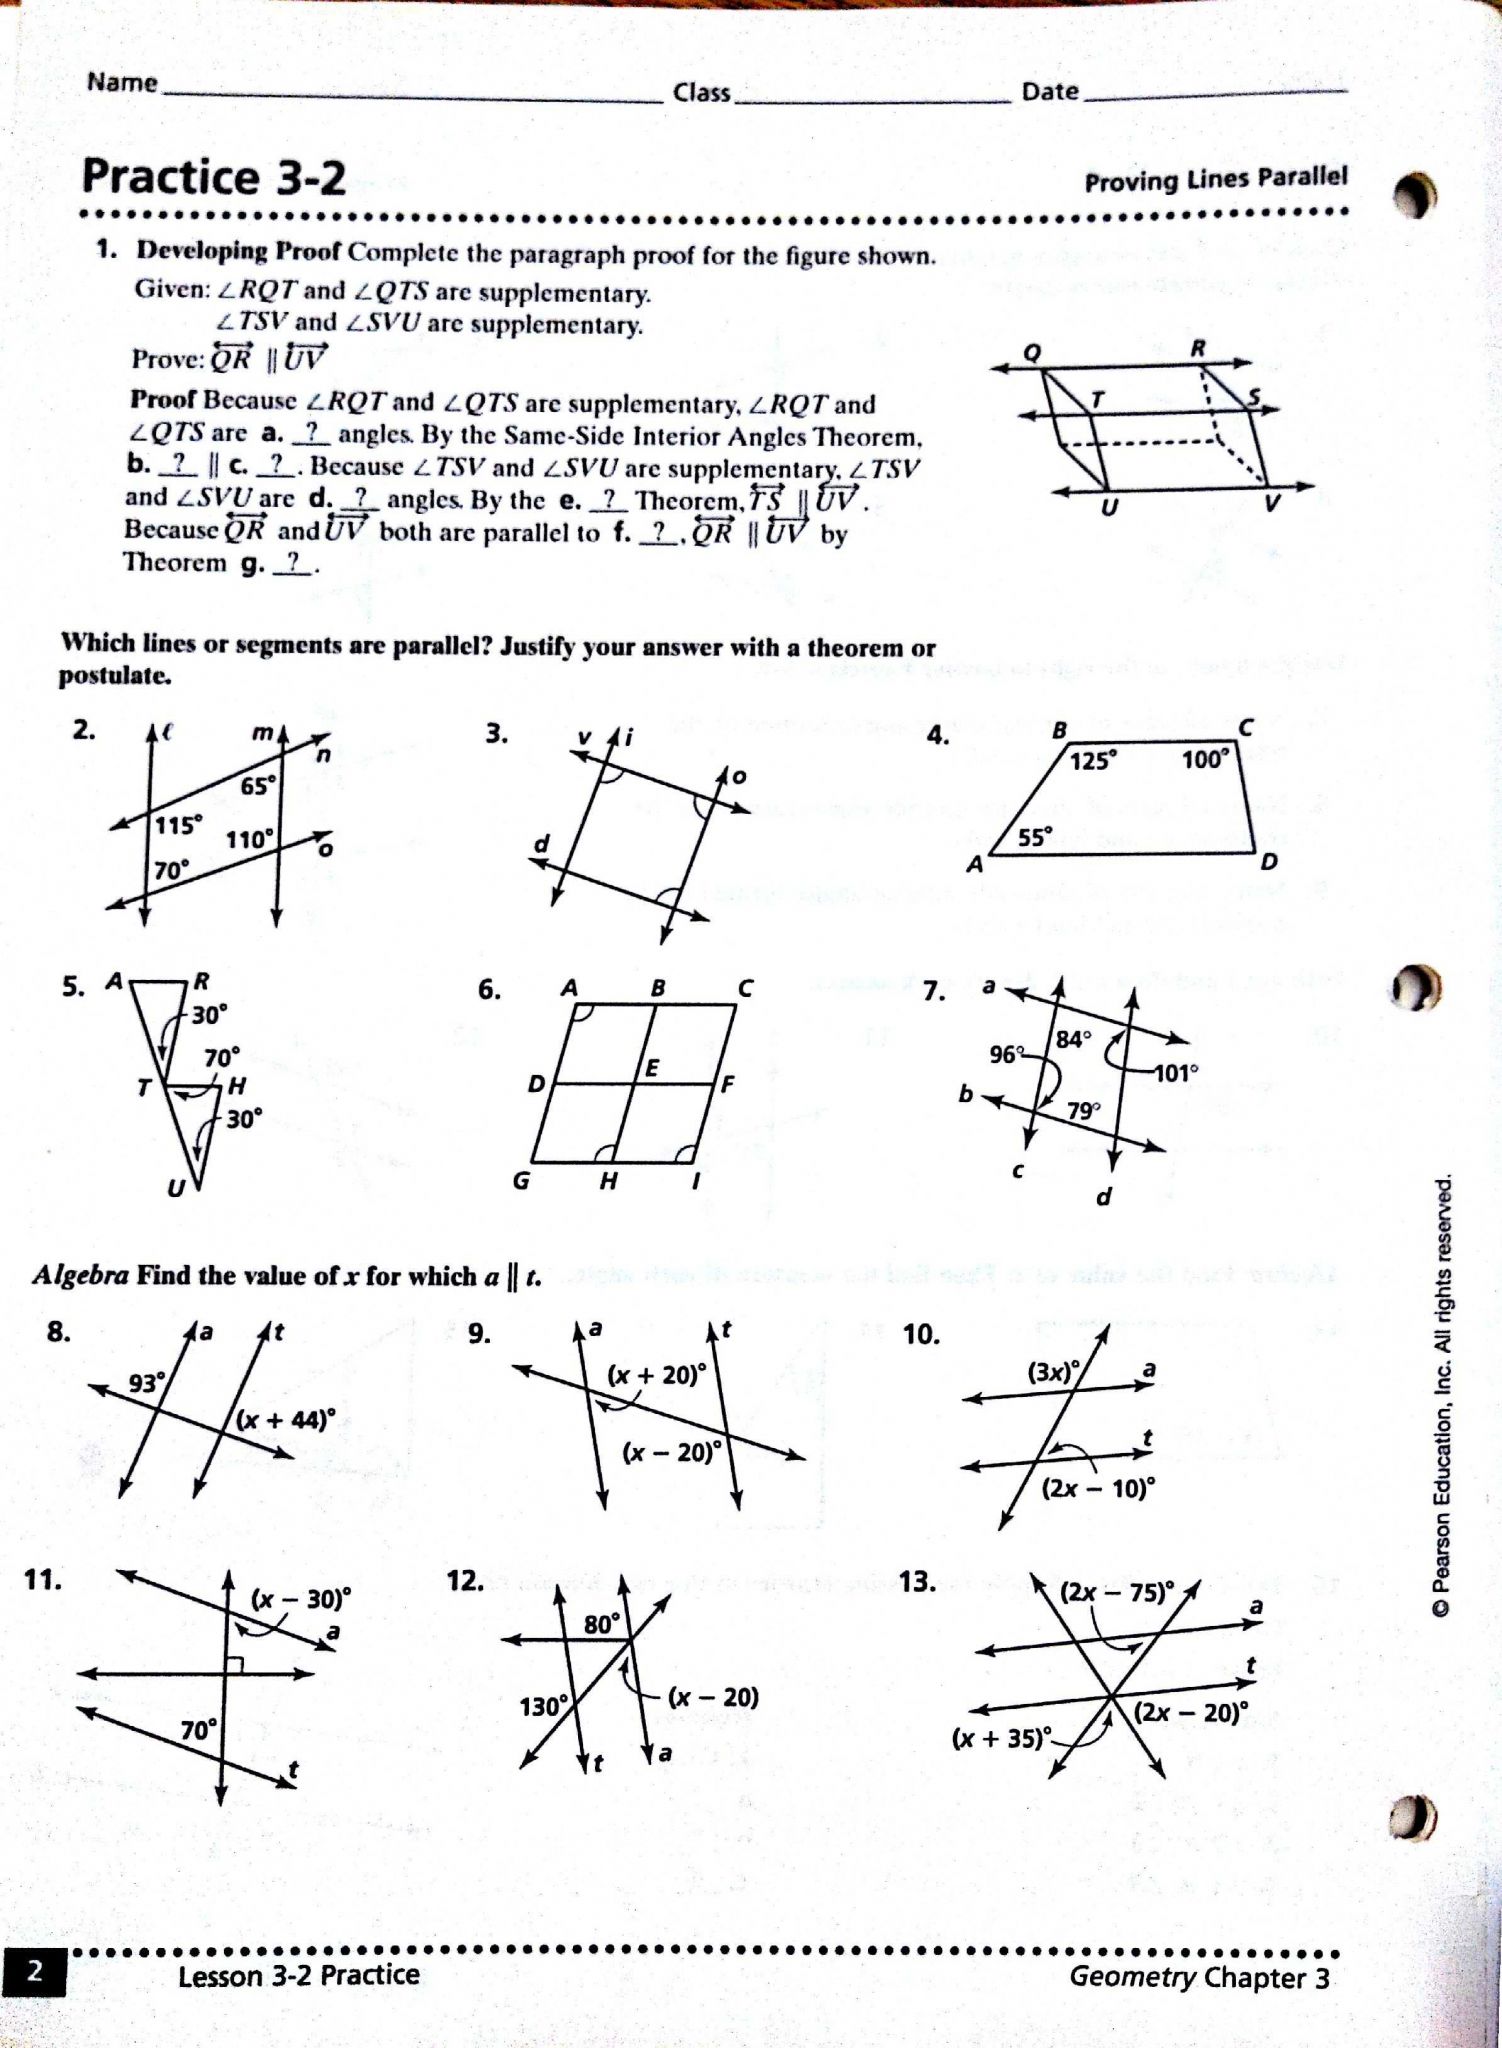 Limiting Reagent Worksheet 2 Along with Transparency Worksheet Answers Gallery Worksheet for Kids Maths